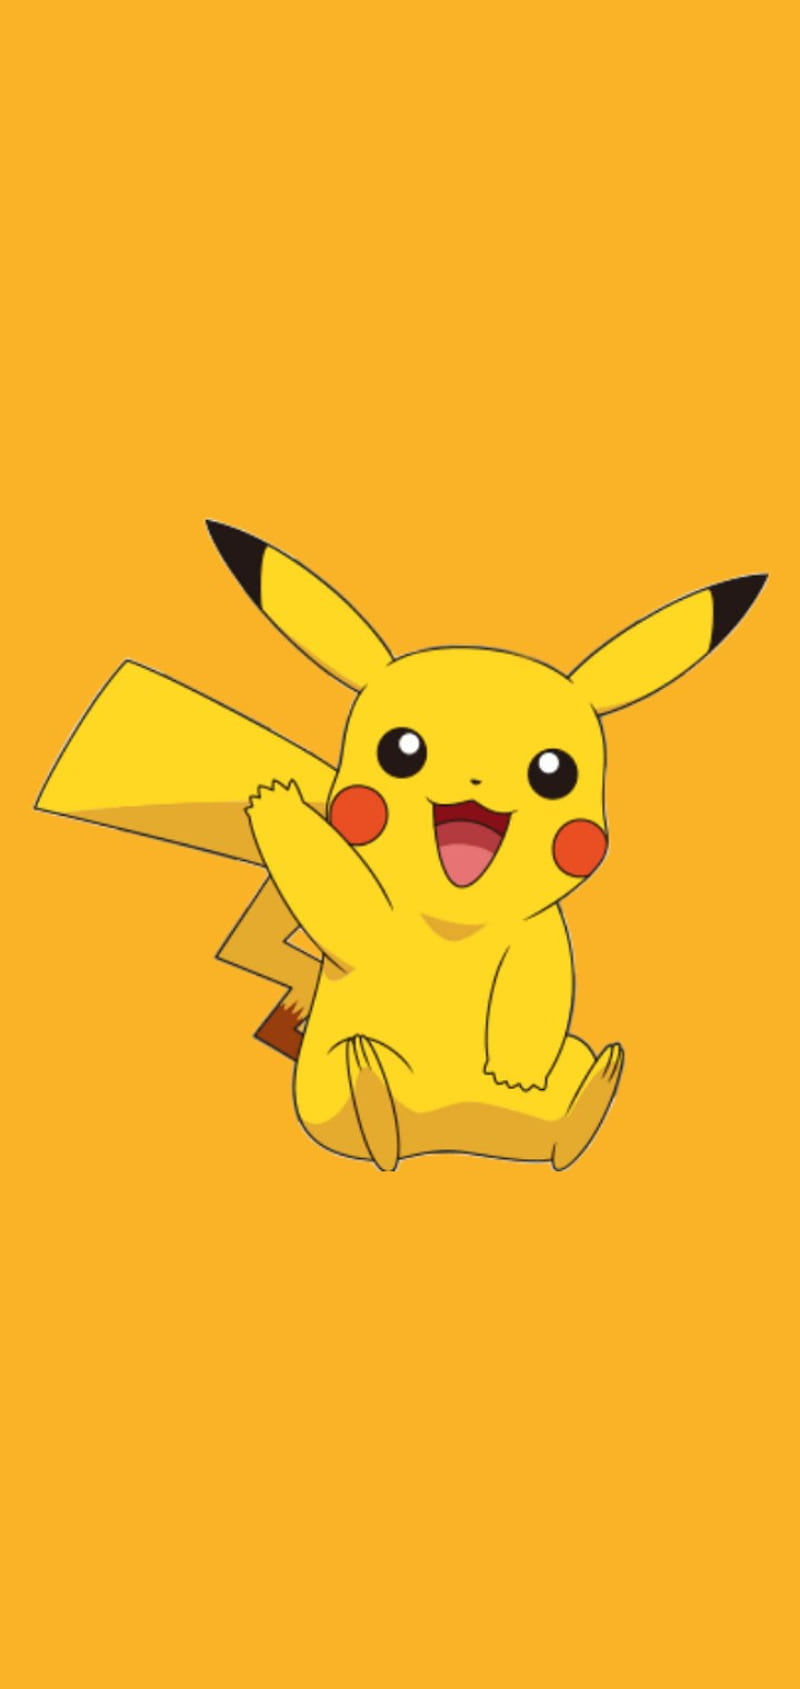 Pikachu wallpaper for iPhone and Android! Download it here: - Pikachu